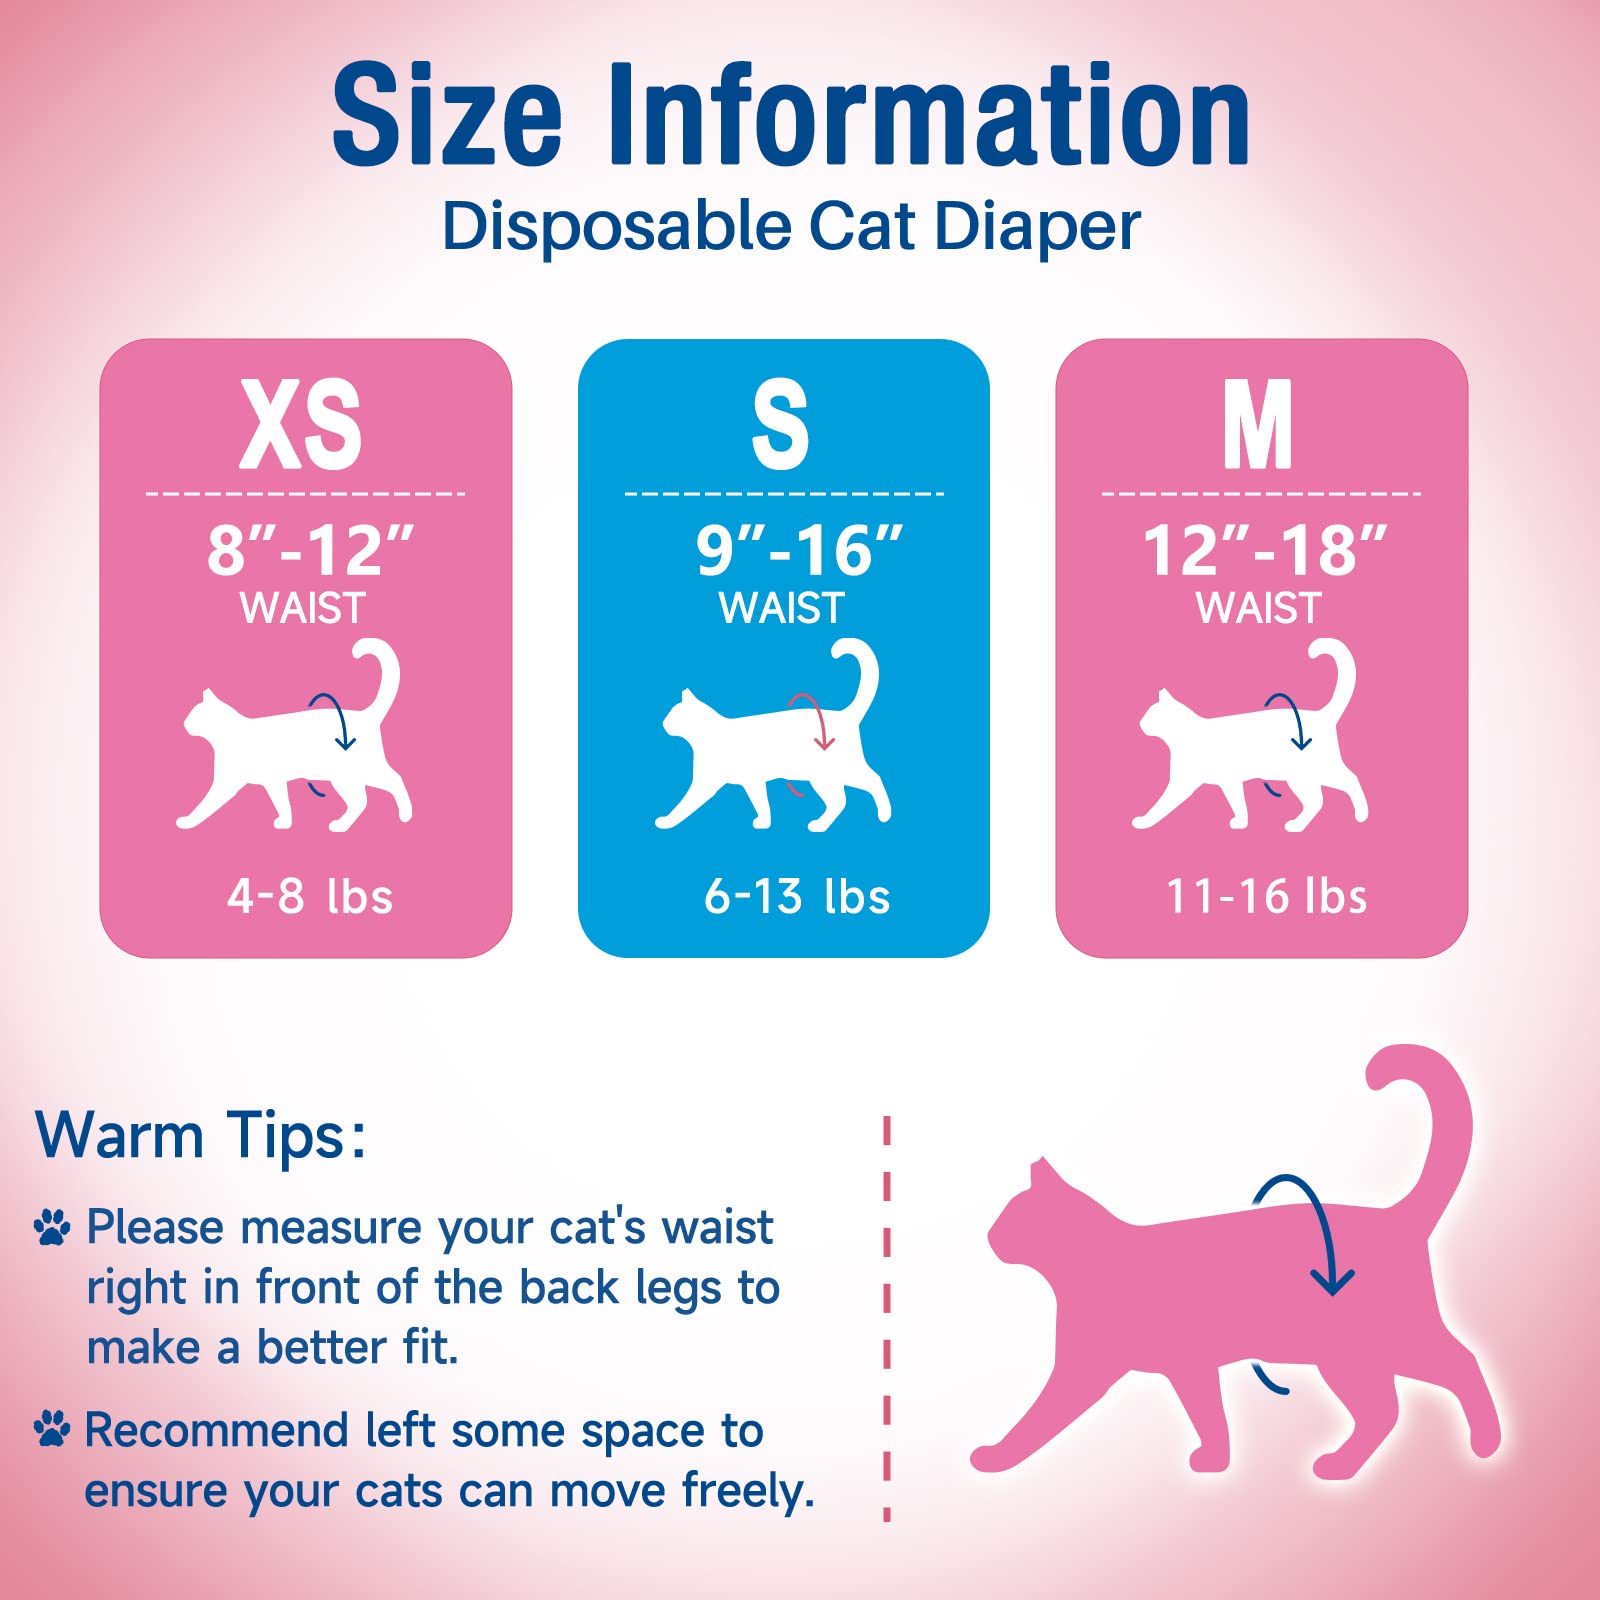 Disposable Cat Diapers, Adjustable Foam Tail Hole, 24 Pcs, 1 Pack